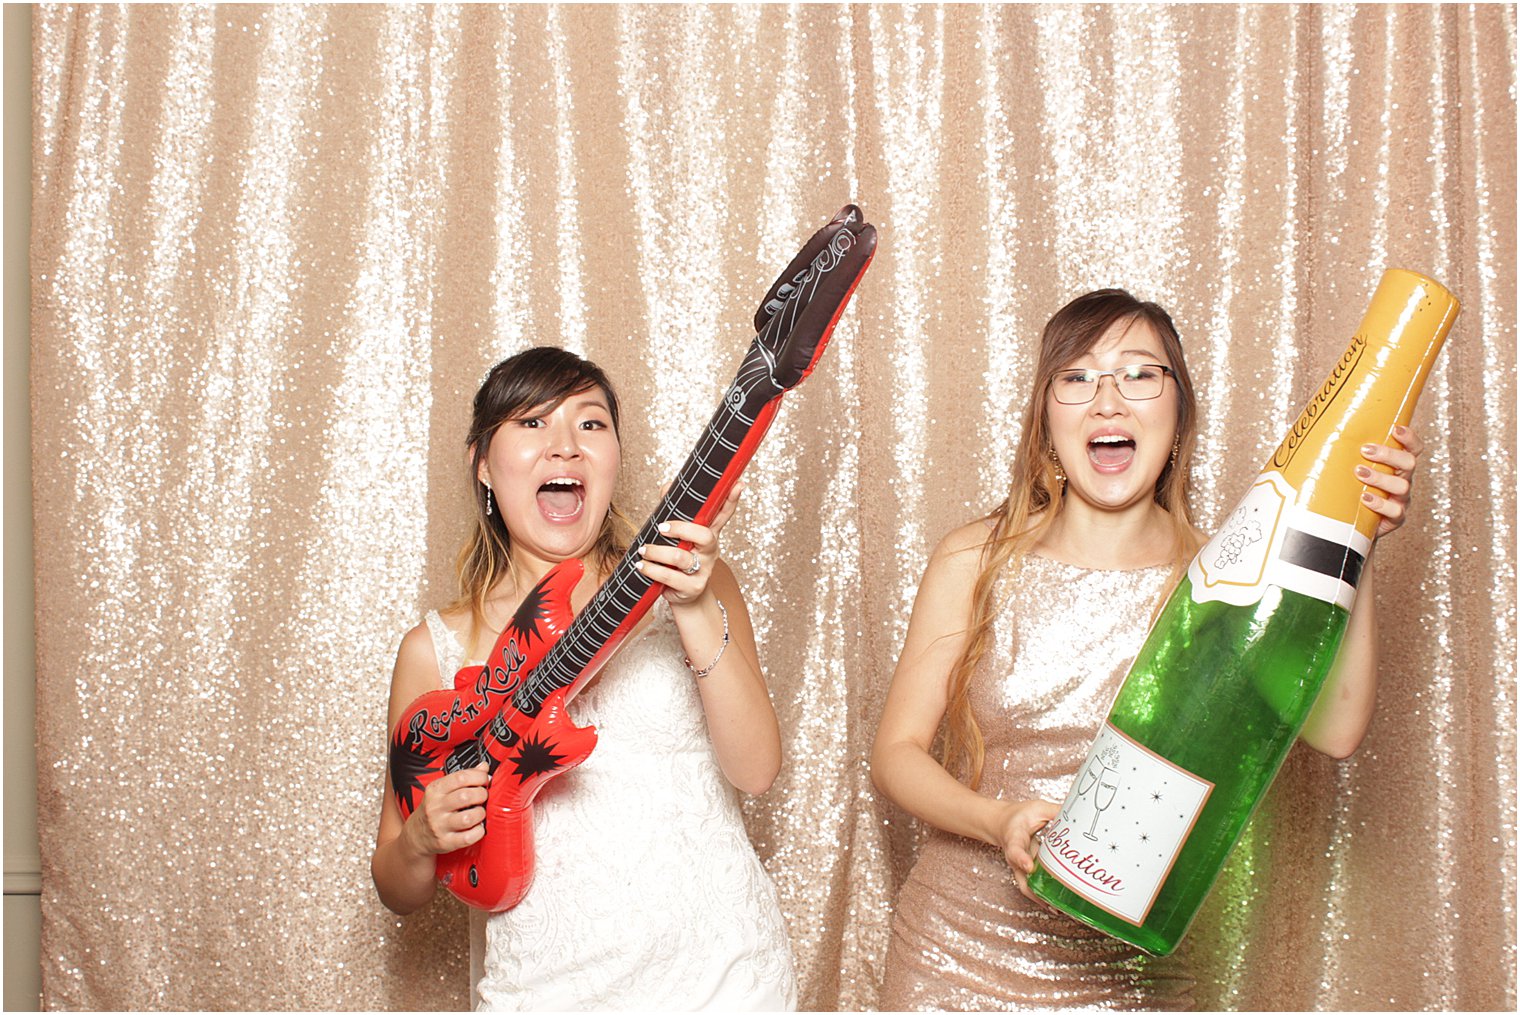 bride dances with sister in photo booth